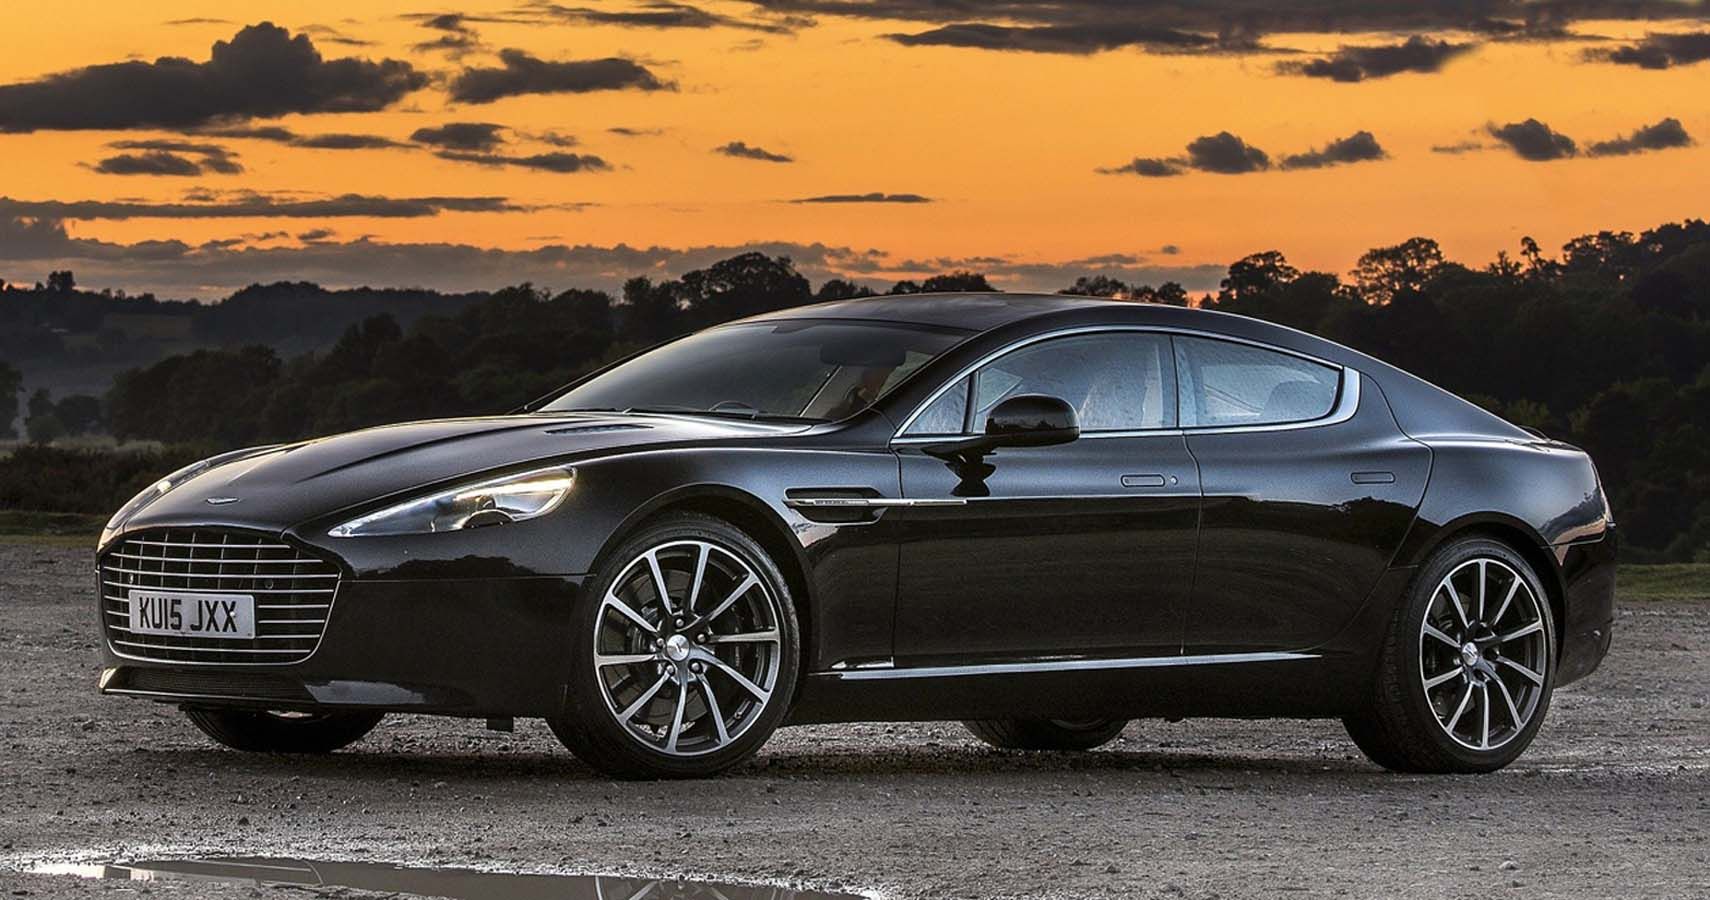 In 2016, The Kid Who Could Not Afford Hot Wheels And Played With Tin Foil Rip-Offs Owns An Aston Martin Rapide In All-Black